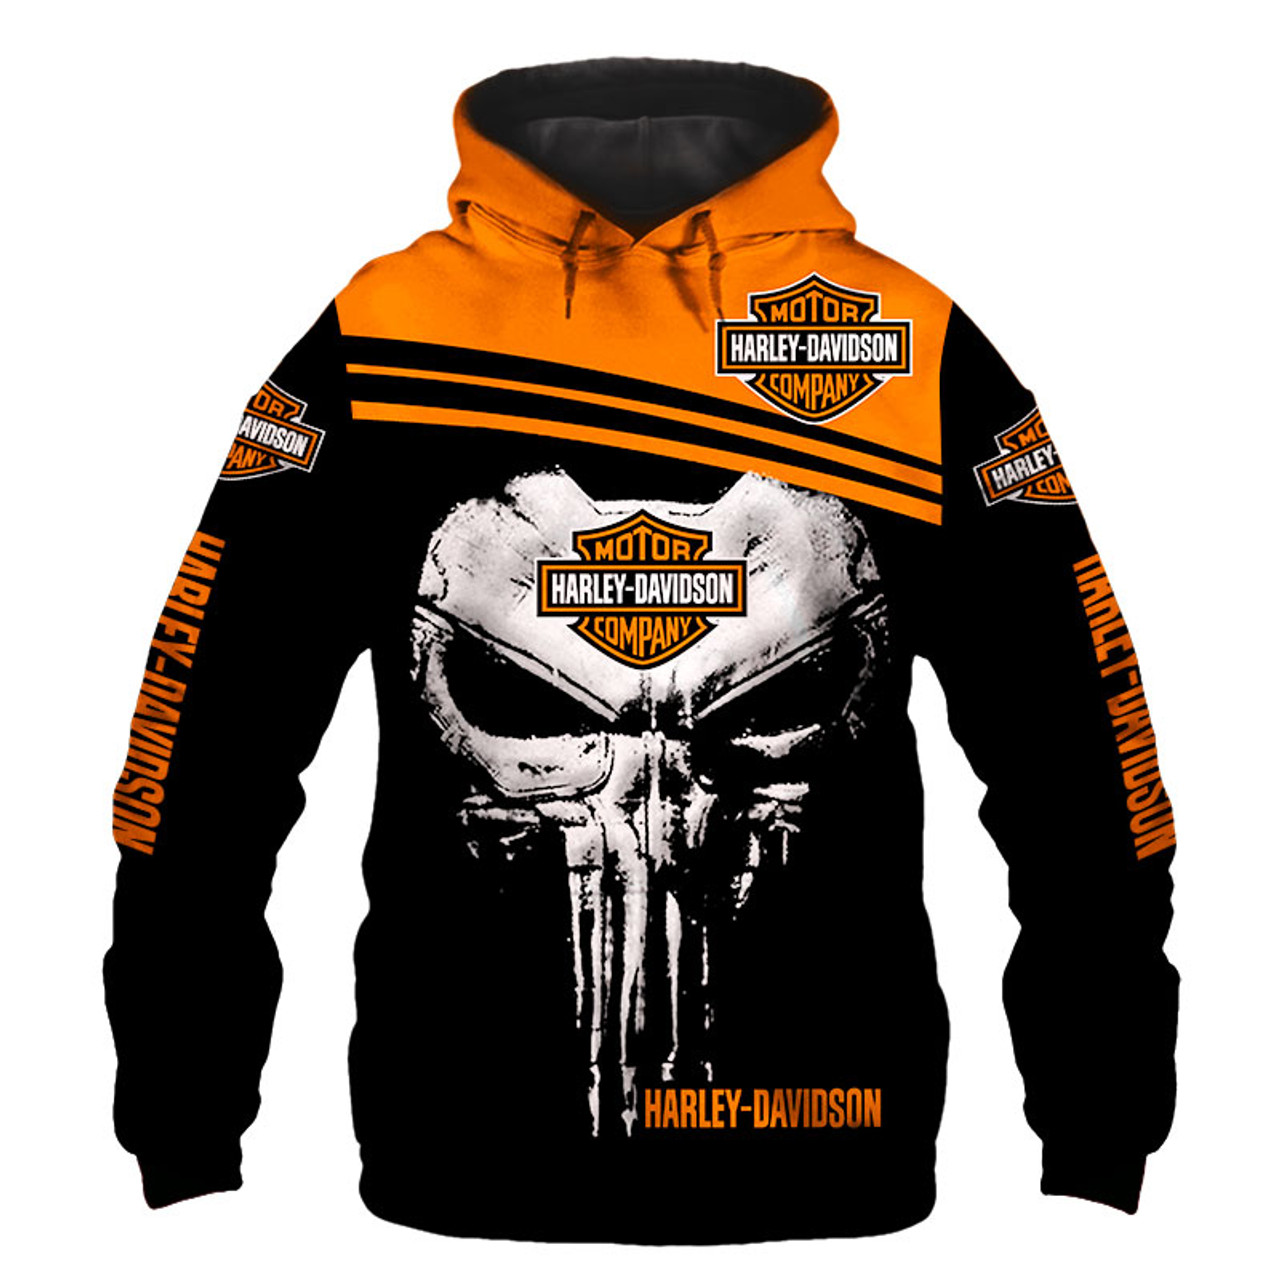  **(OFFICIAL-HARLEY-DAVIDSON-MOTORCYCLE-PULLOVER-HOODIES/CUSTOM-DETAILED-3D-GRAPHIC-PRINTED-PUNISHER-SKULL-DESIGN/FEATURING-OFFICIAL-CUSTOM-HARLEY-3D-LOGOS & OFFICIAL-CLASSIC-HARLEY-COLORS-ALL-OVER-DESIGN/WARM-PREMIUM-HARLEY-RIDING-PULLOVER-HOODIES)**